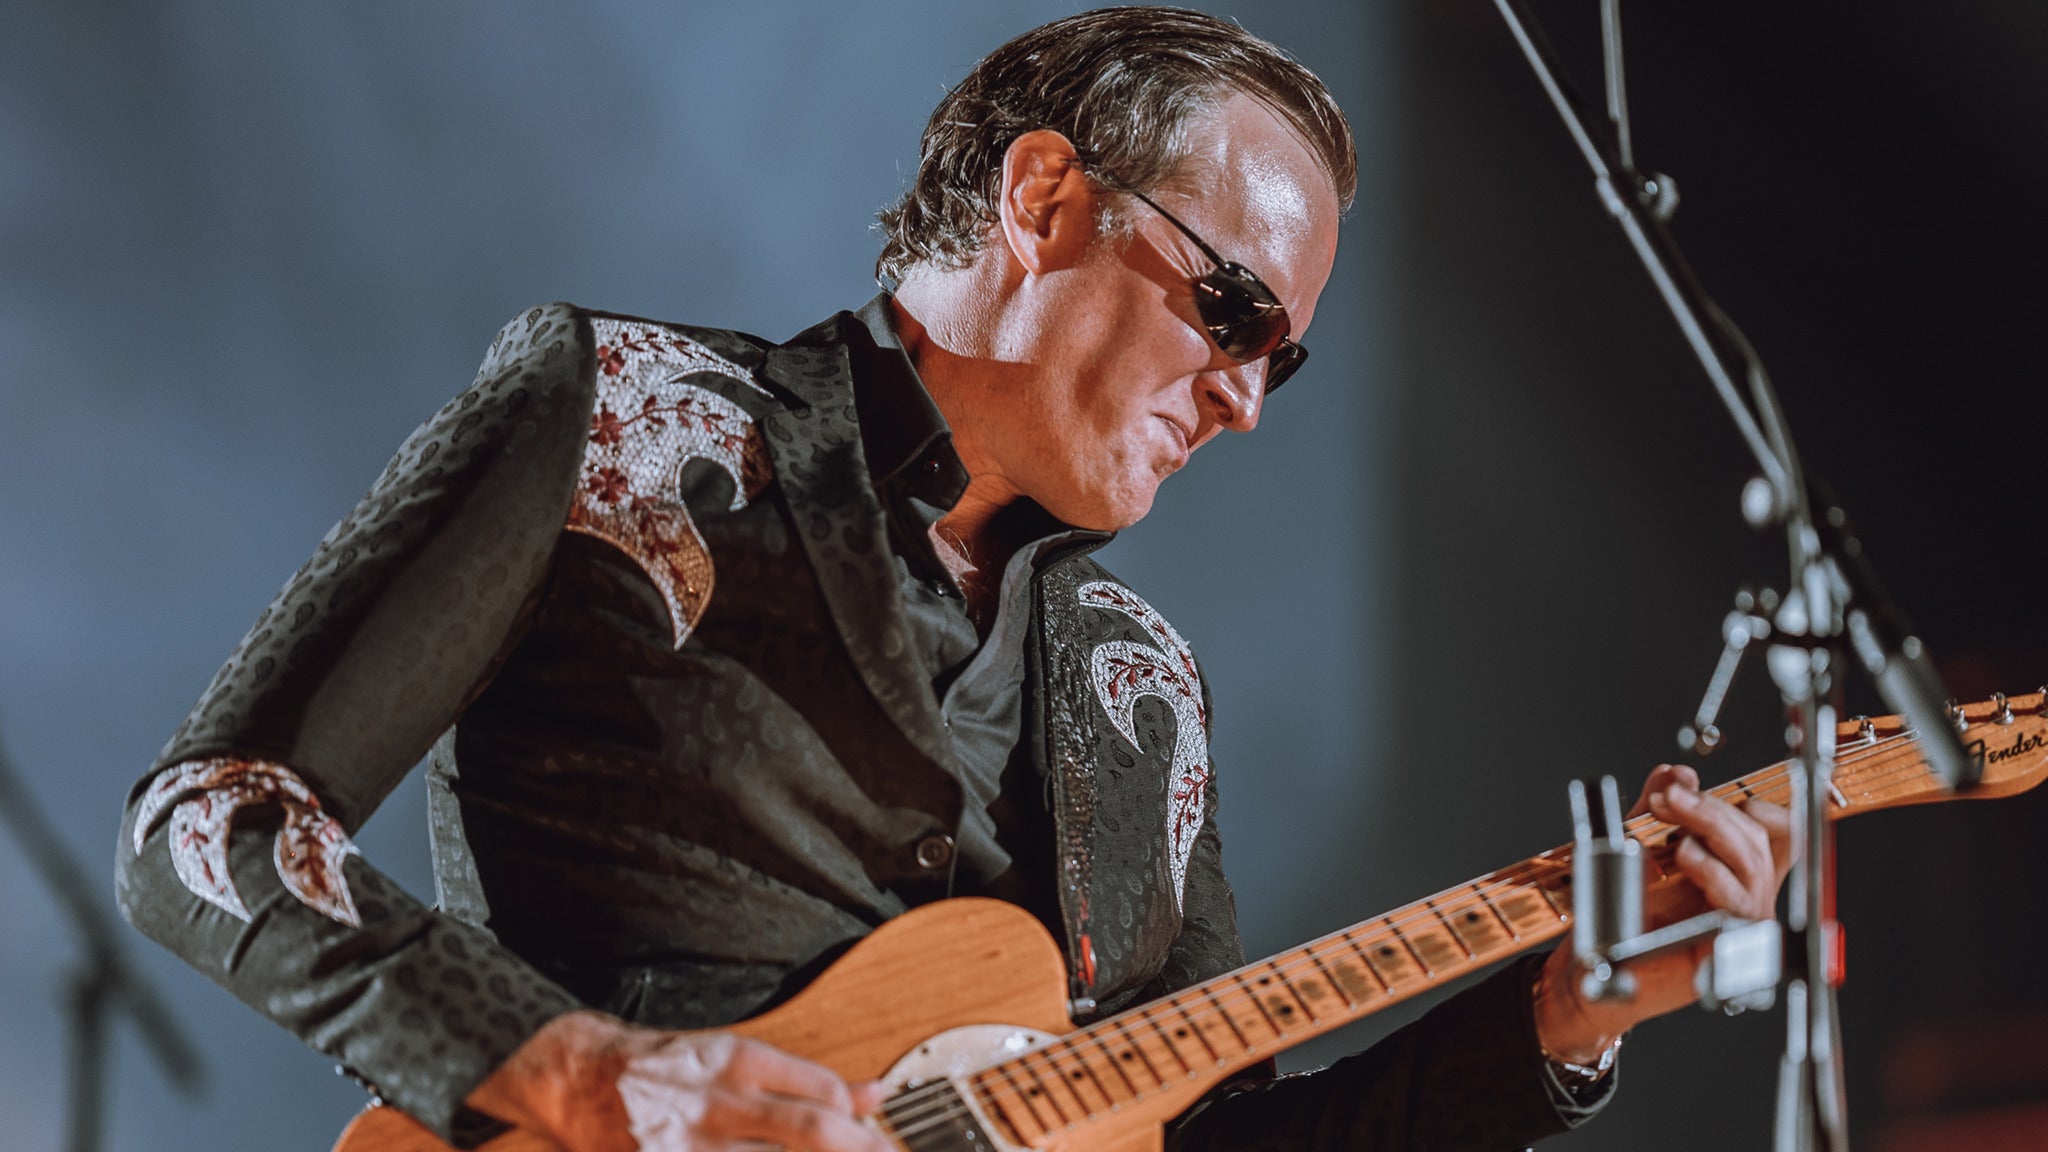 Joe Bonamassa & STYX with Don Felder Formerly of the Eagles pre-sale password for concert tickets in Bethel, NY (Bethel Woods Center for the Arts)